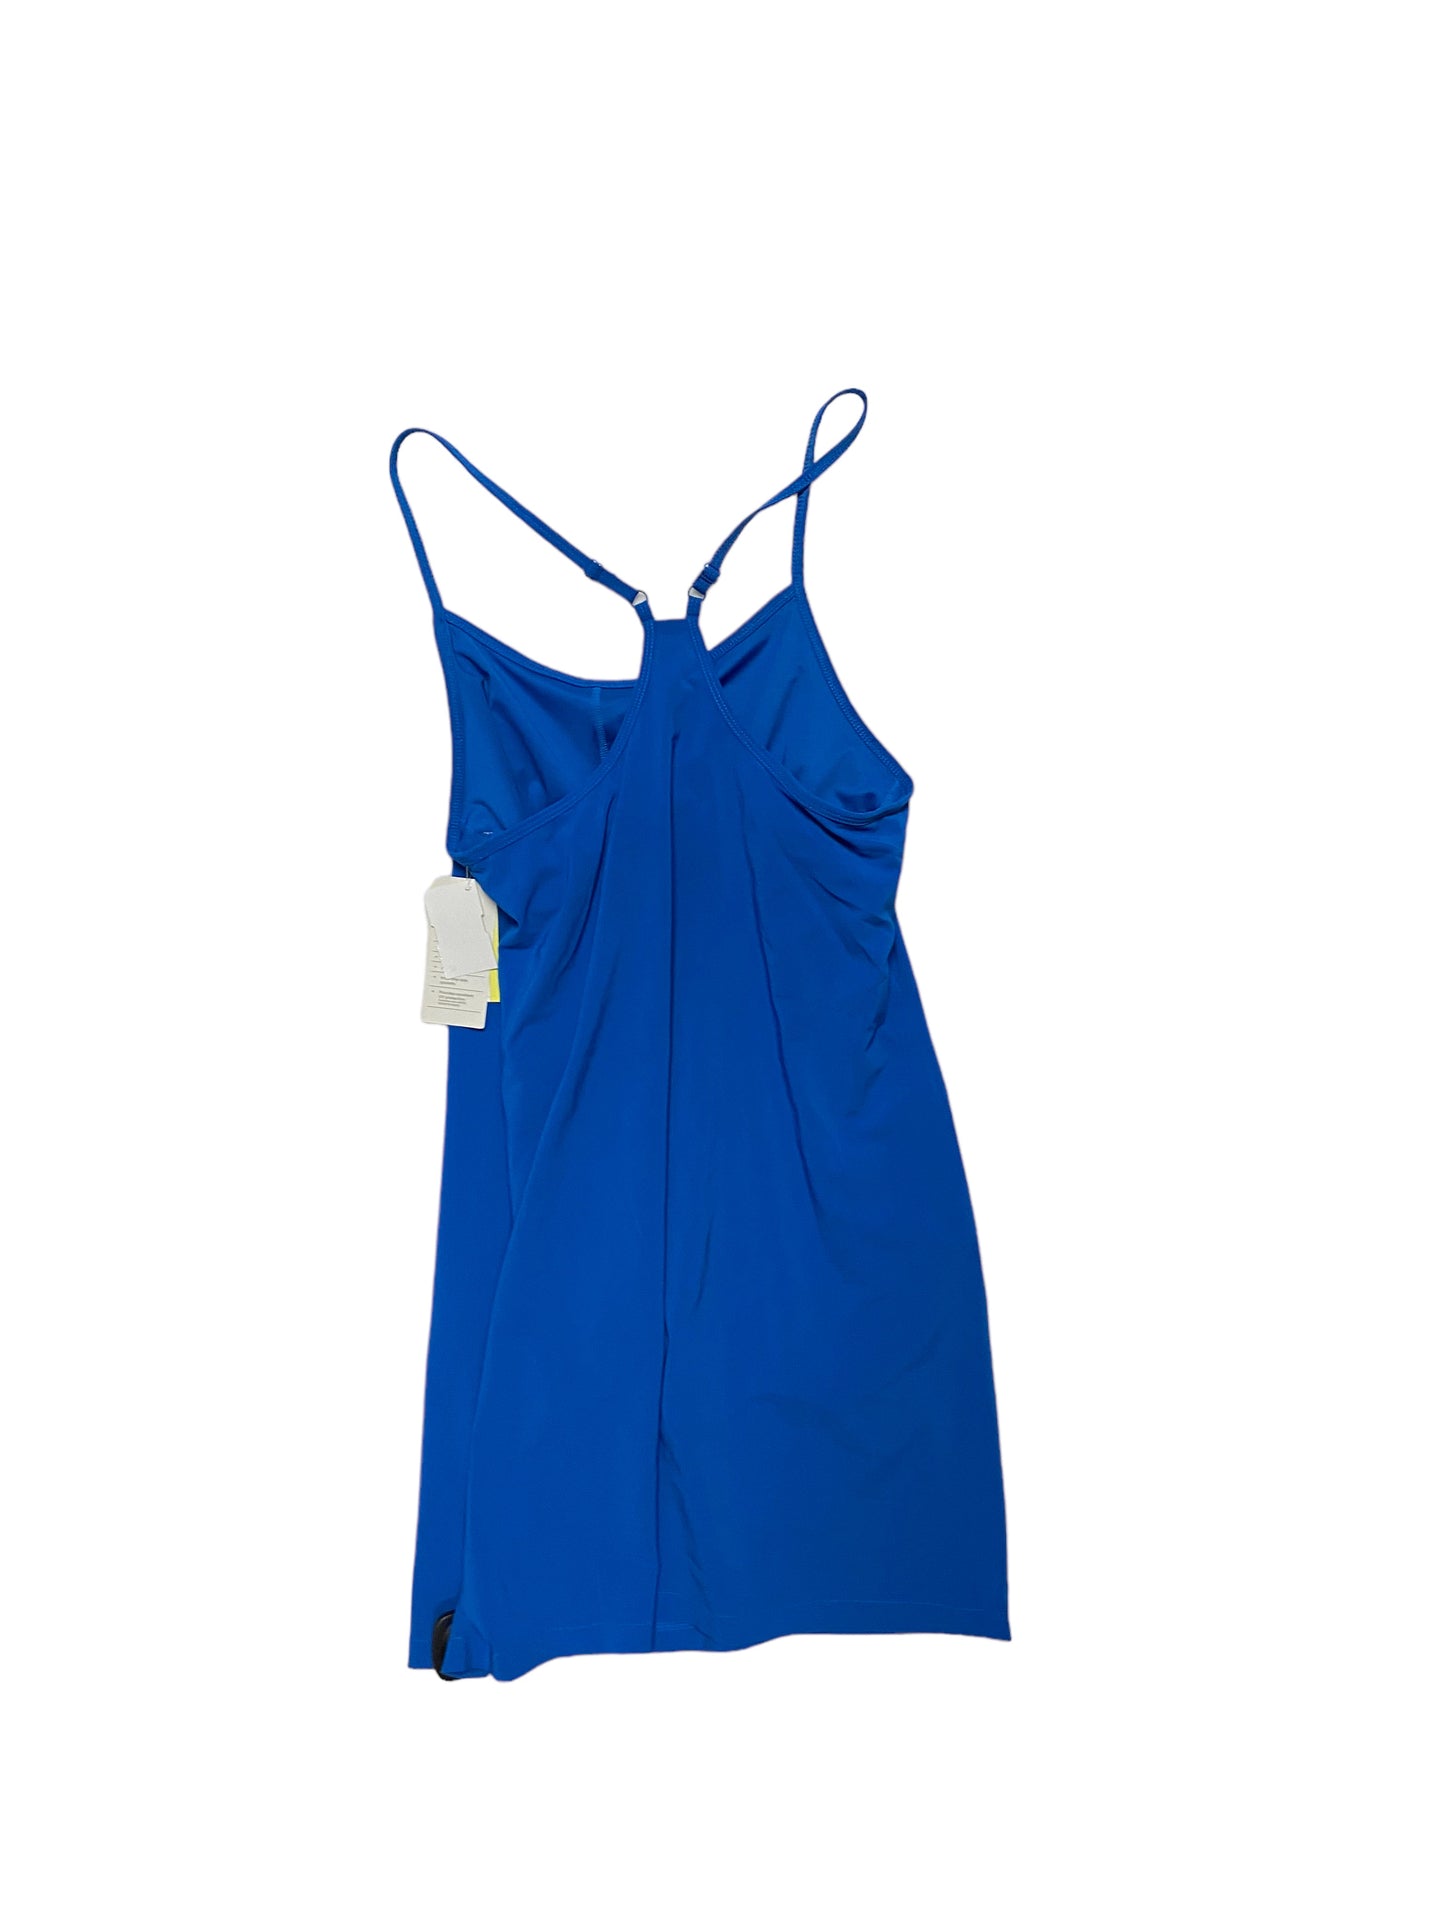 Blue Athletic Dress All In Motion, Size S